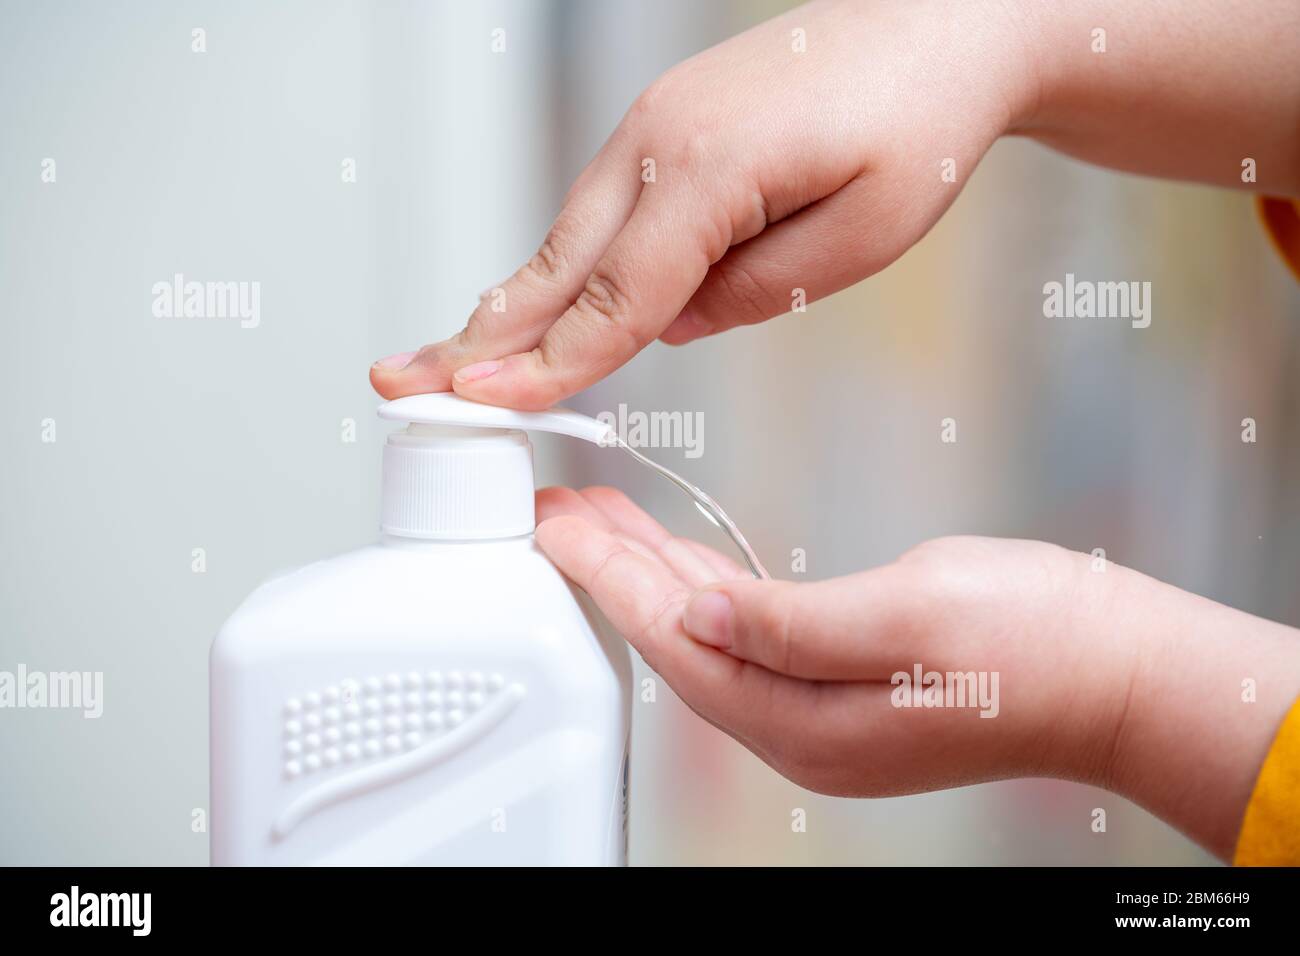 Disinfecting your hands with sanitizer for disinfection and killing the viruses on your hands. Stock Photo